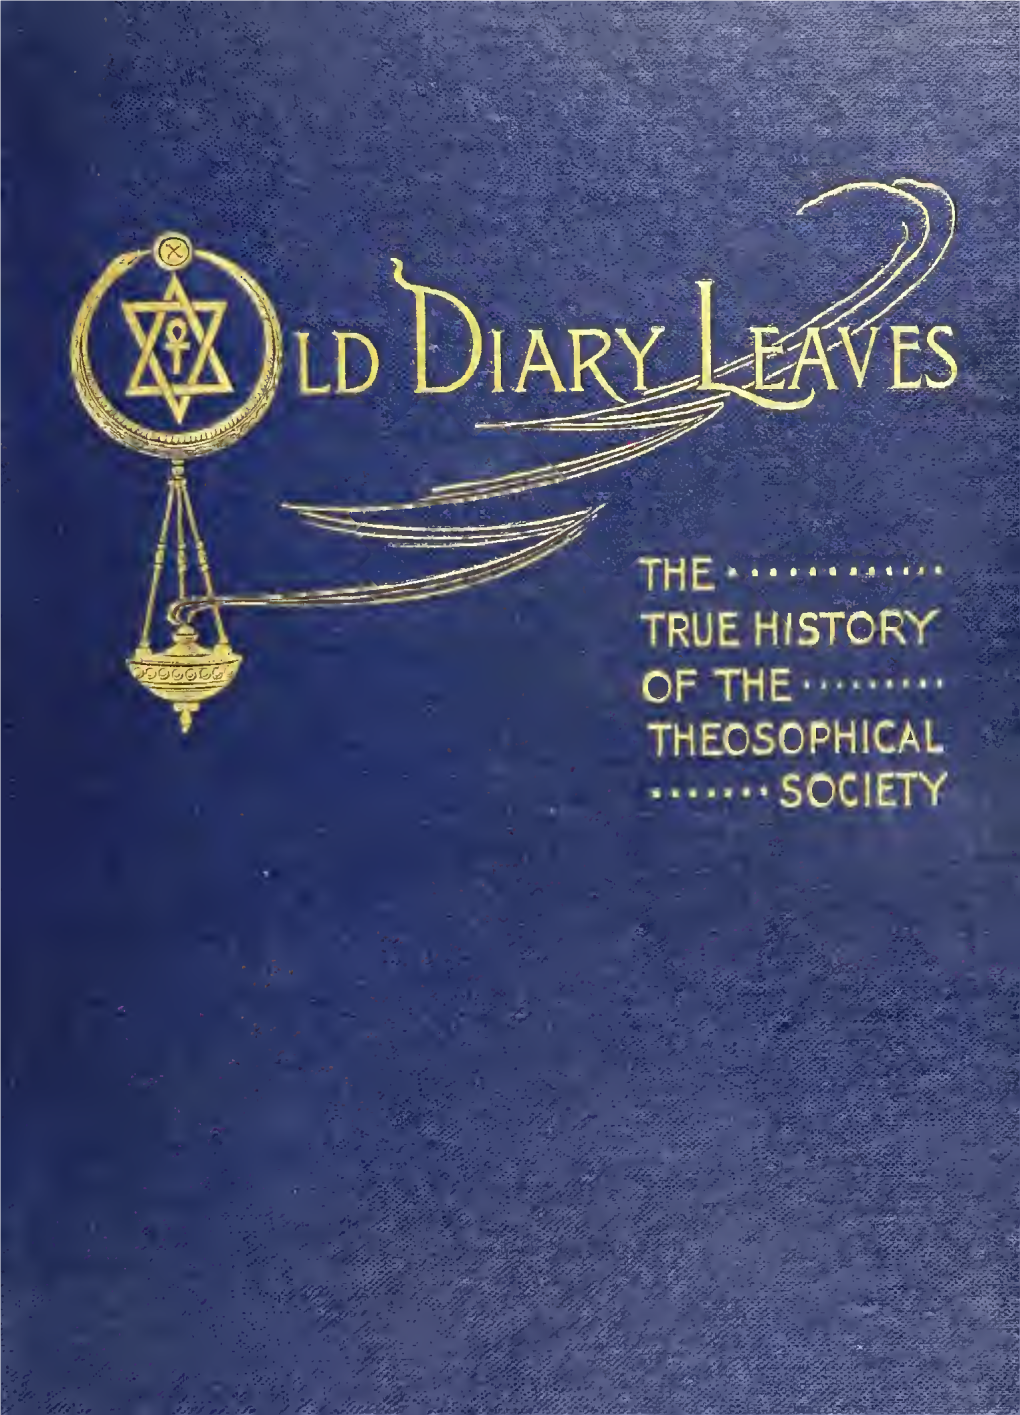 Old Diary Leaves, the True Story of the Theosophical Society